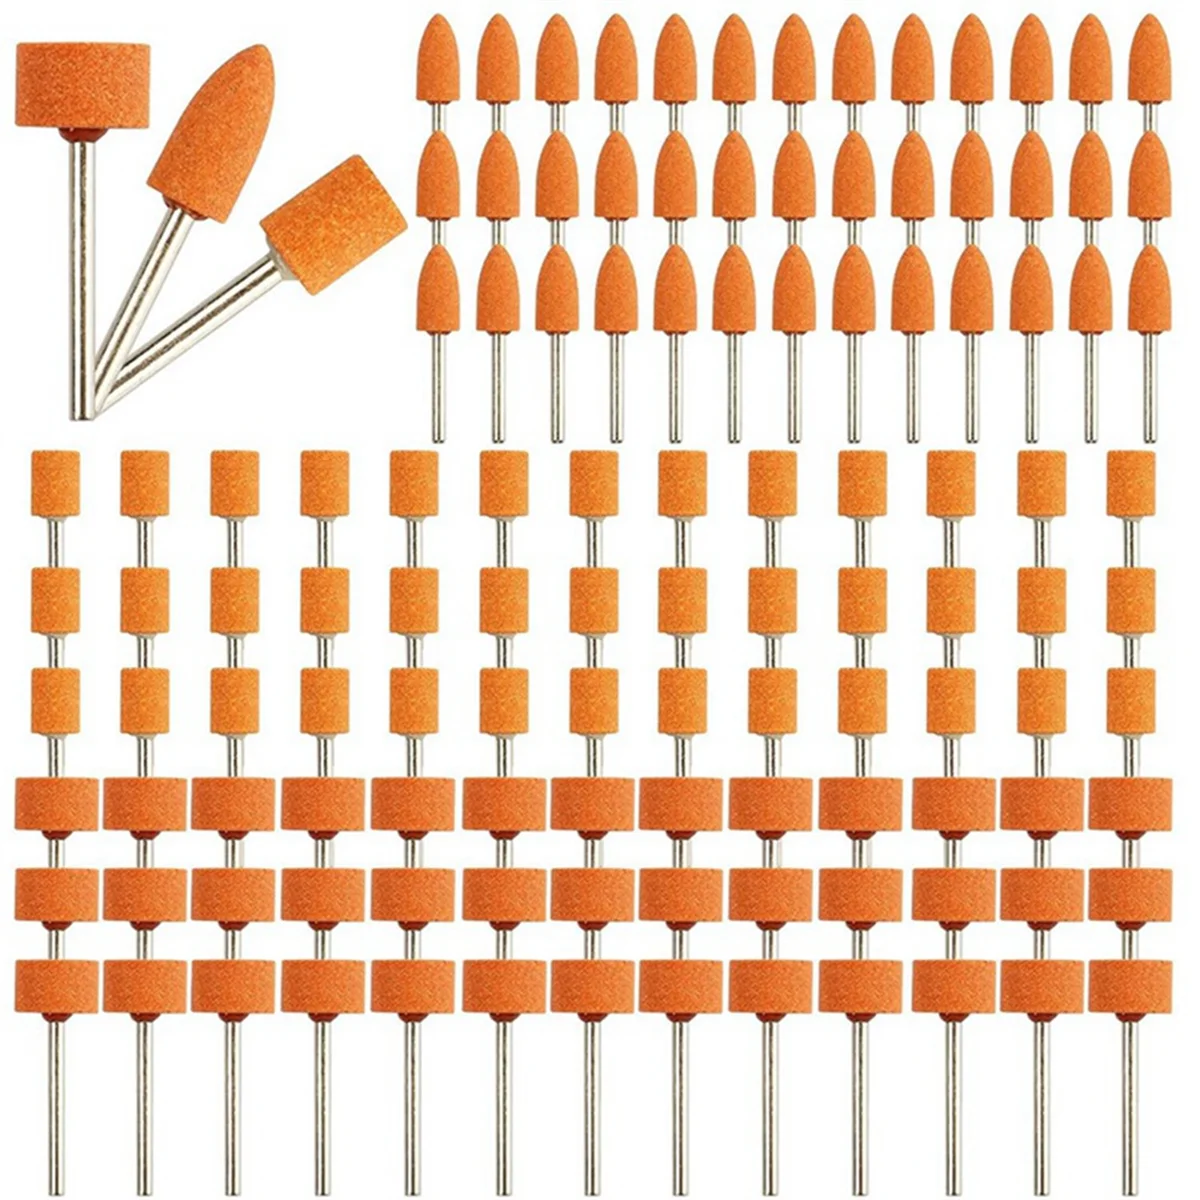 

120Pcs Sanding Bits for Rotary Tool, Strong Grinding Stones Bits with 1/8In Shank, Aluminum Oxide Sanding Accessories